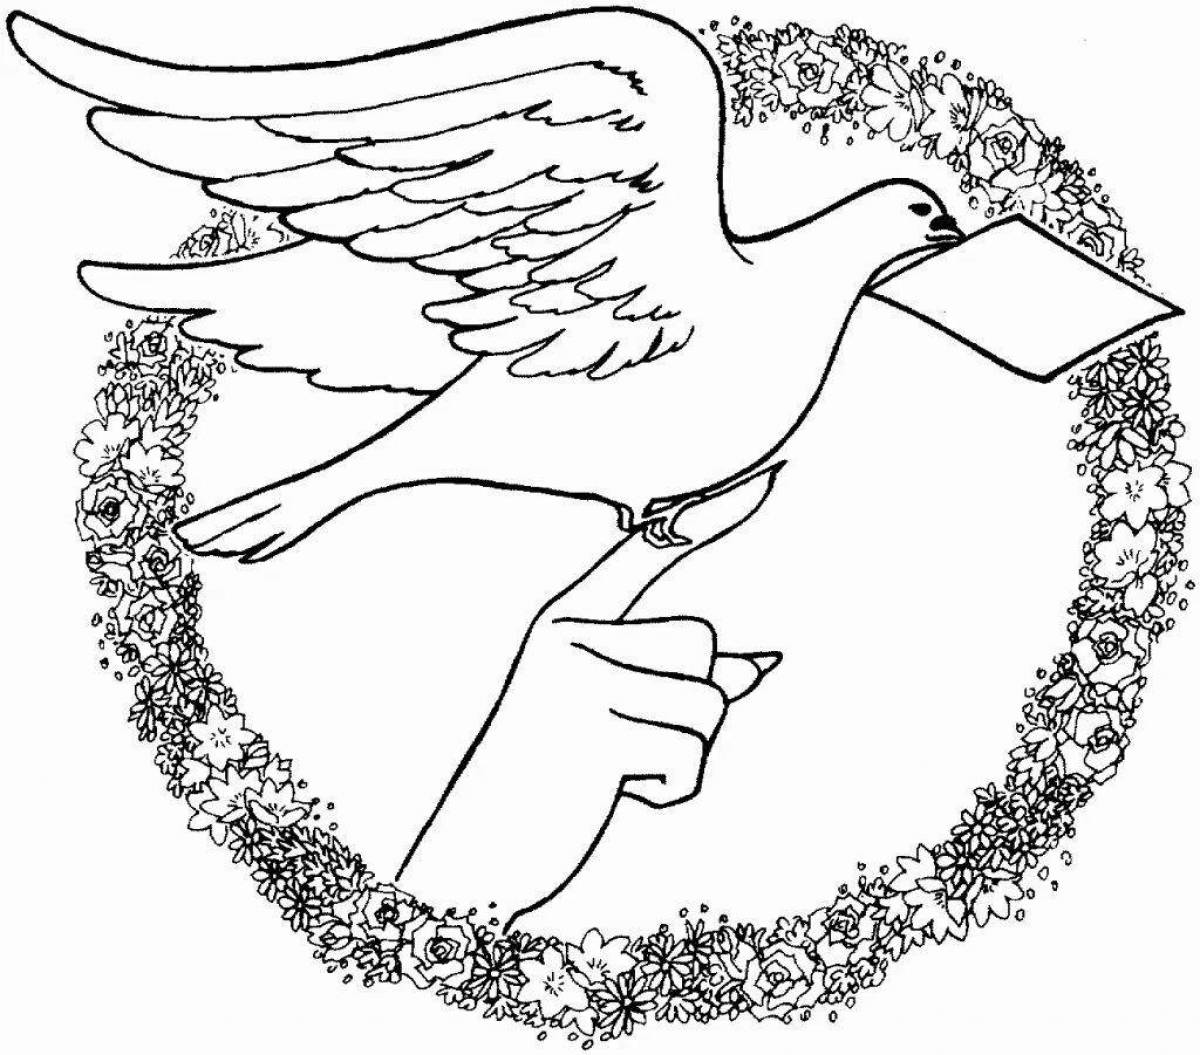 Glorious world peace without war coloring pages